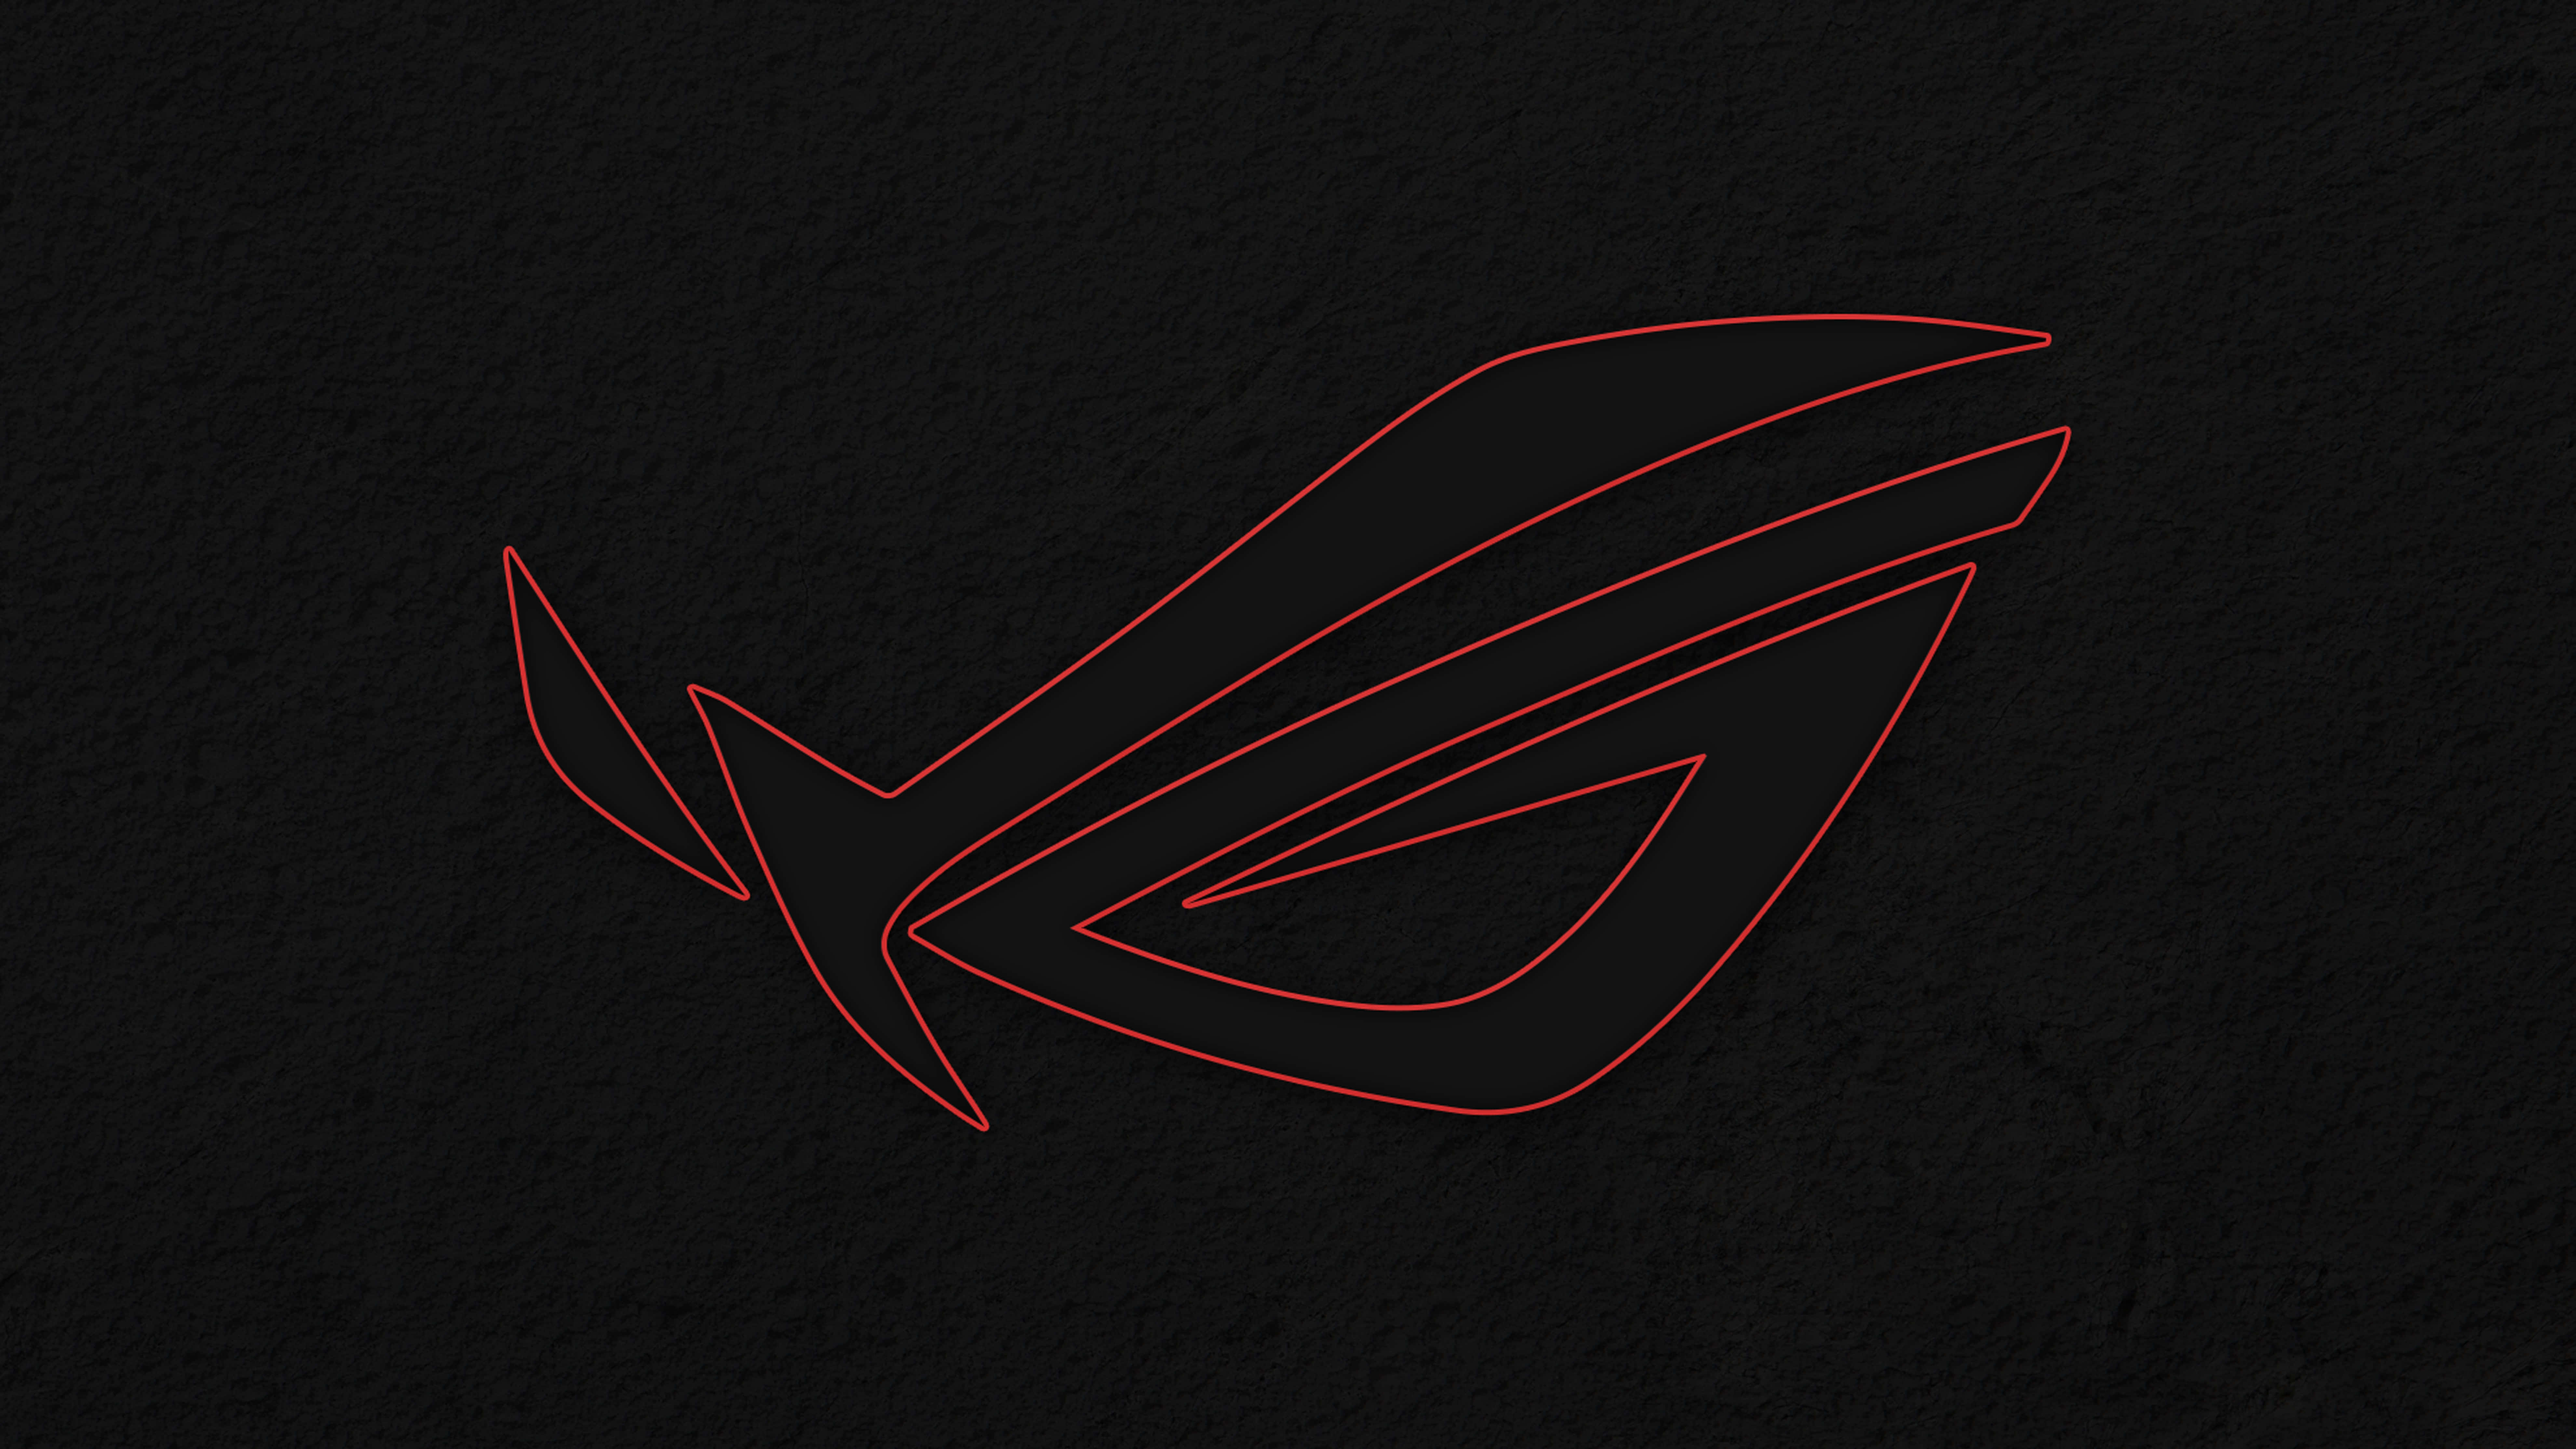 Download Unleash your Potential with ROG | Wallpapers.com